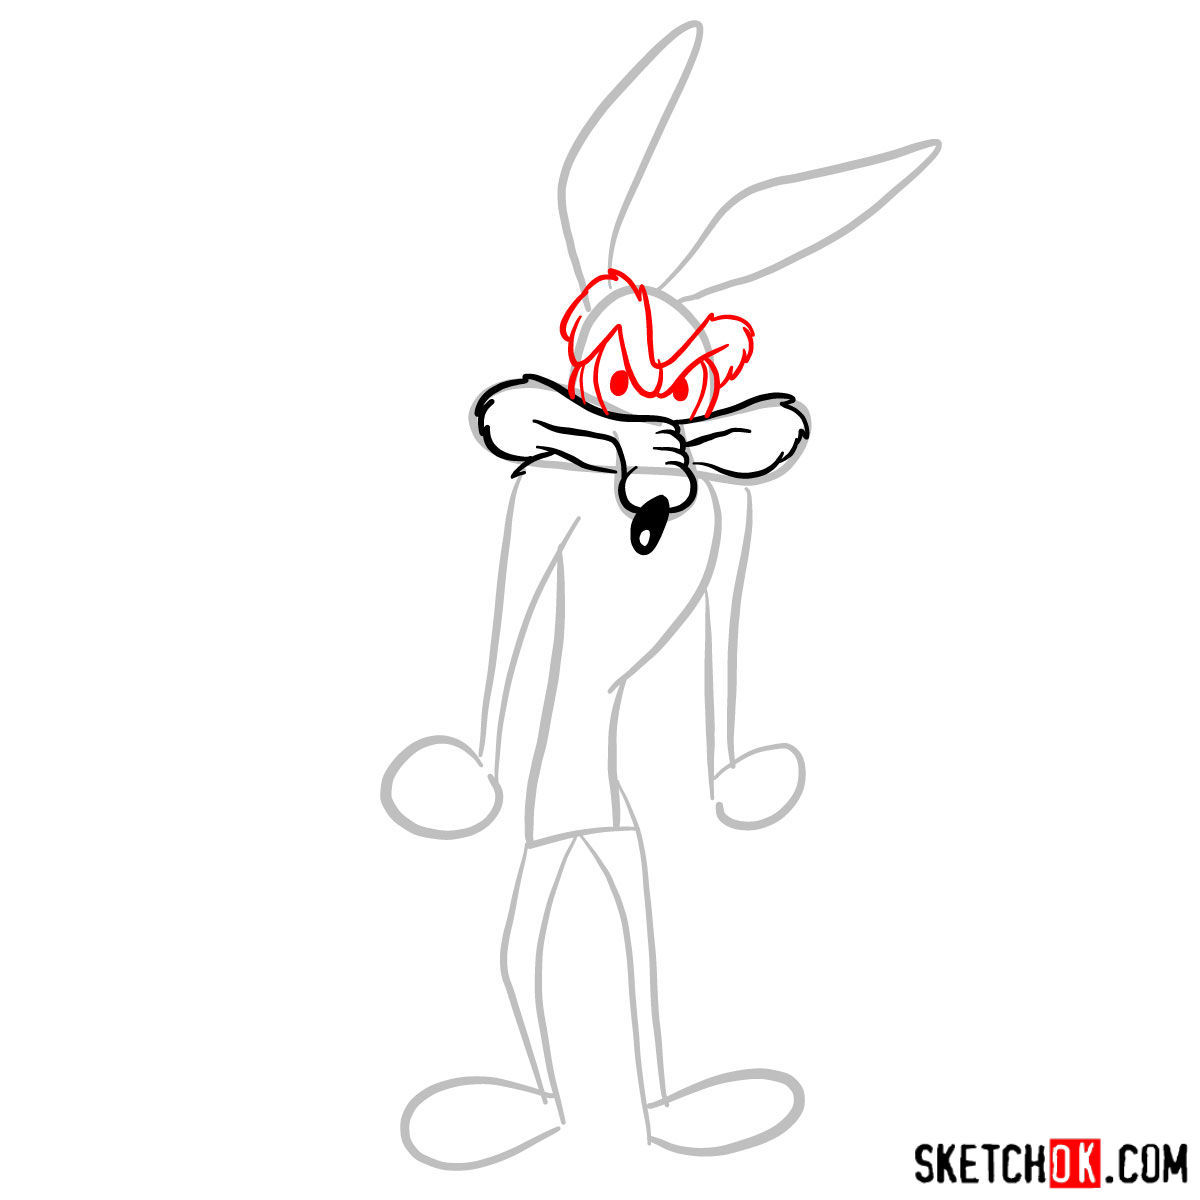 How to draw Wile E. Coyote - step 03